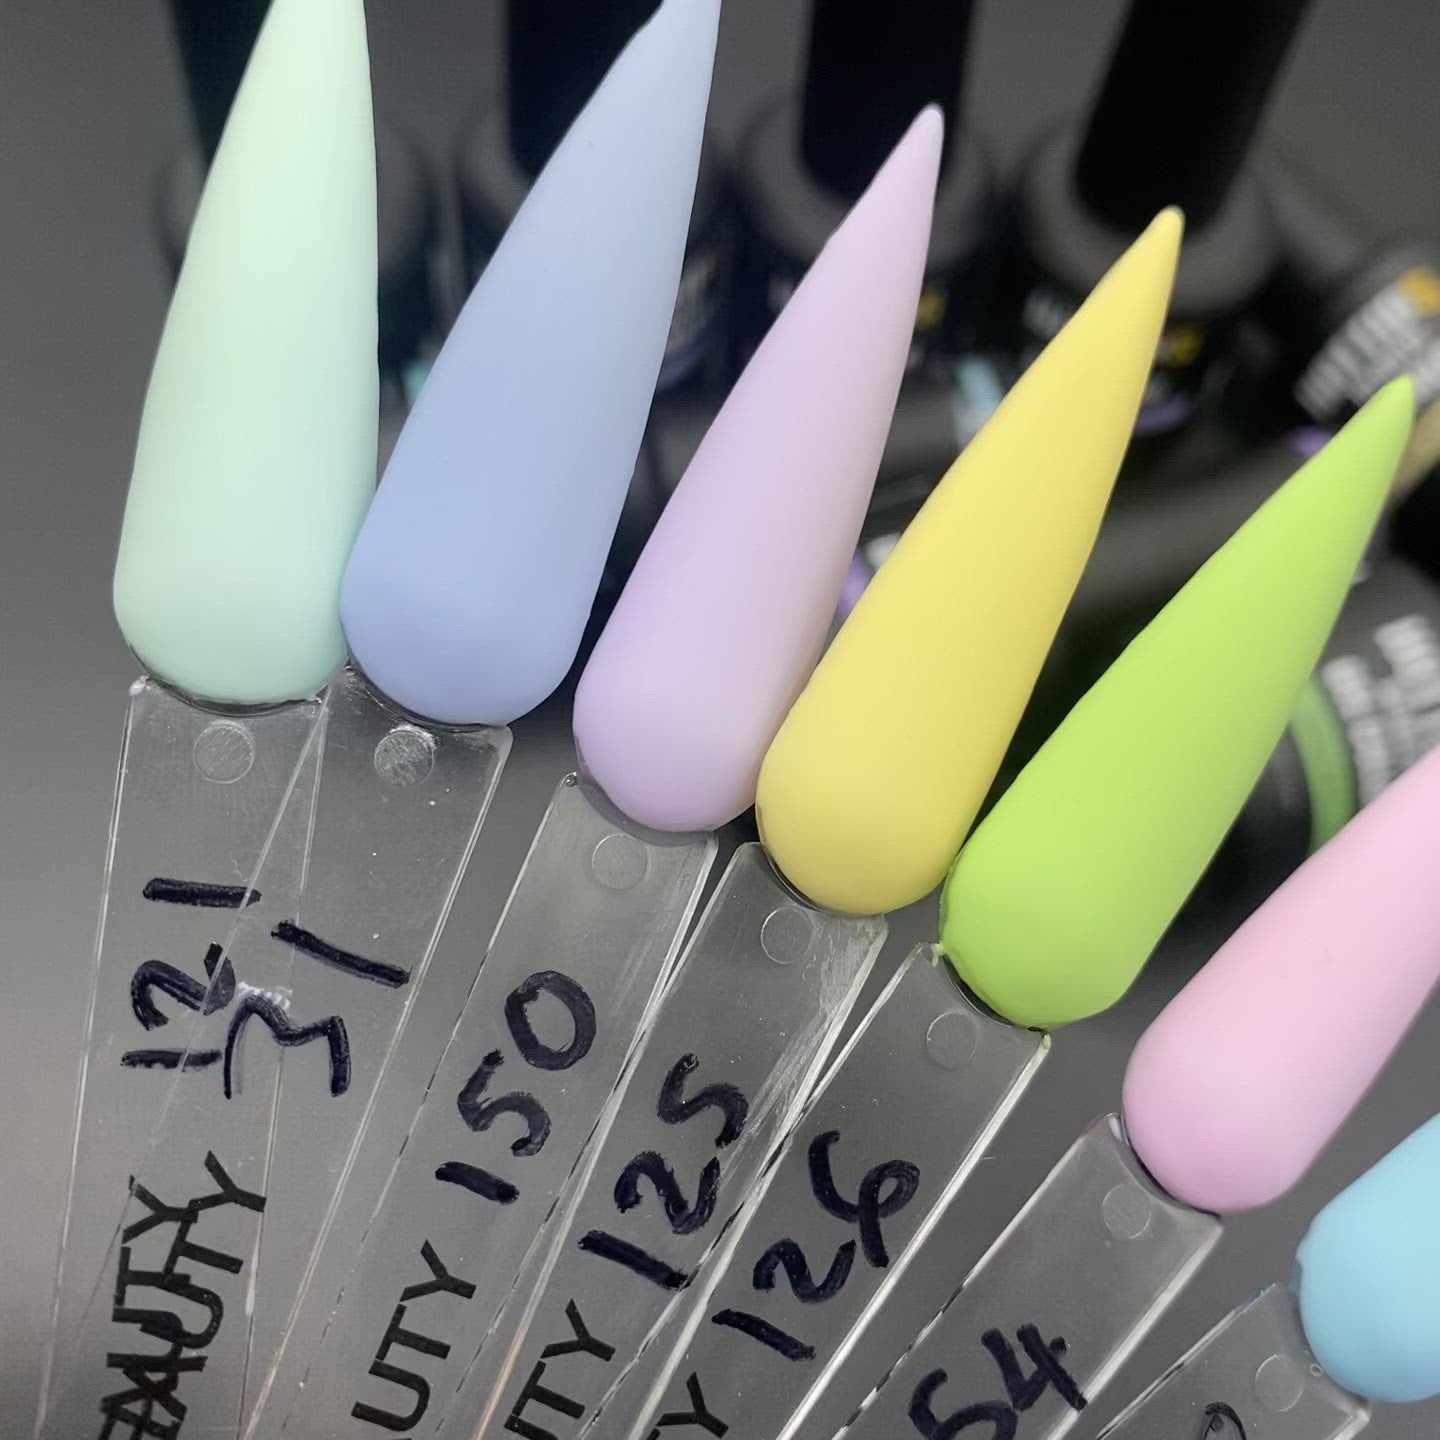 Gel Master - Pastel Collection ( 8 colors #121; 31; 150; 125; 126; 154; 170; 147)